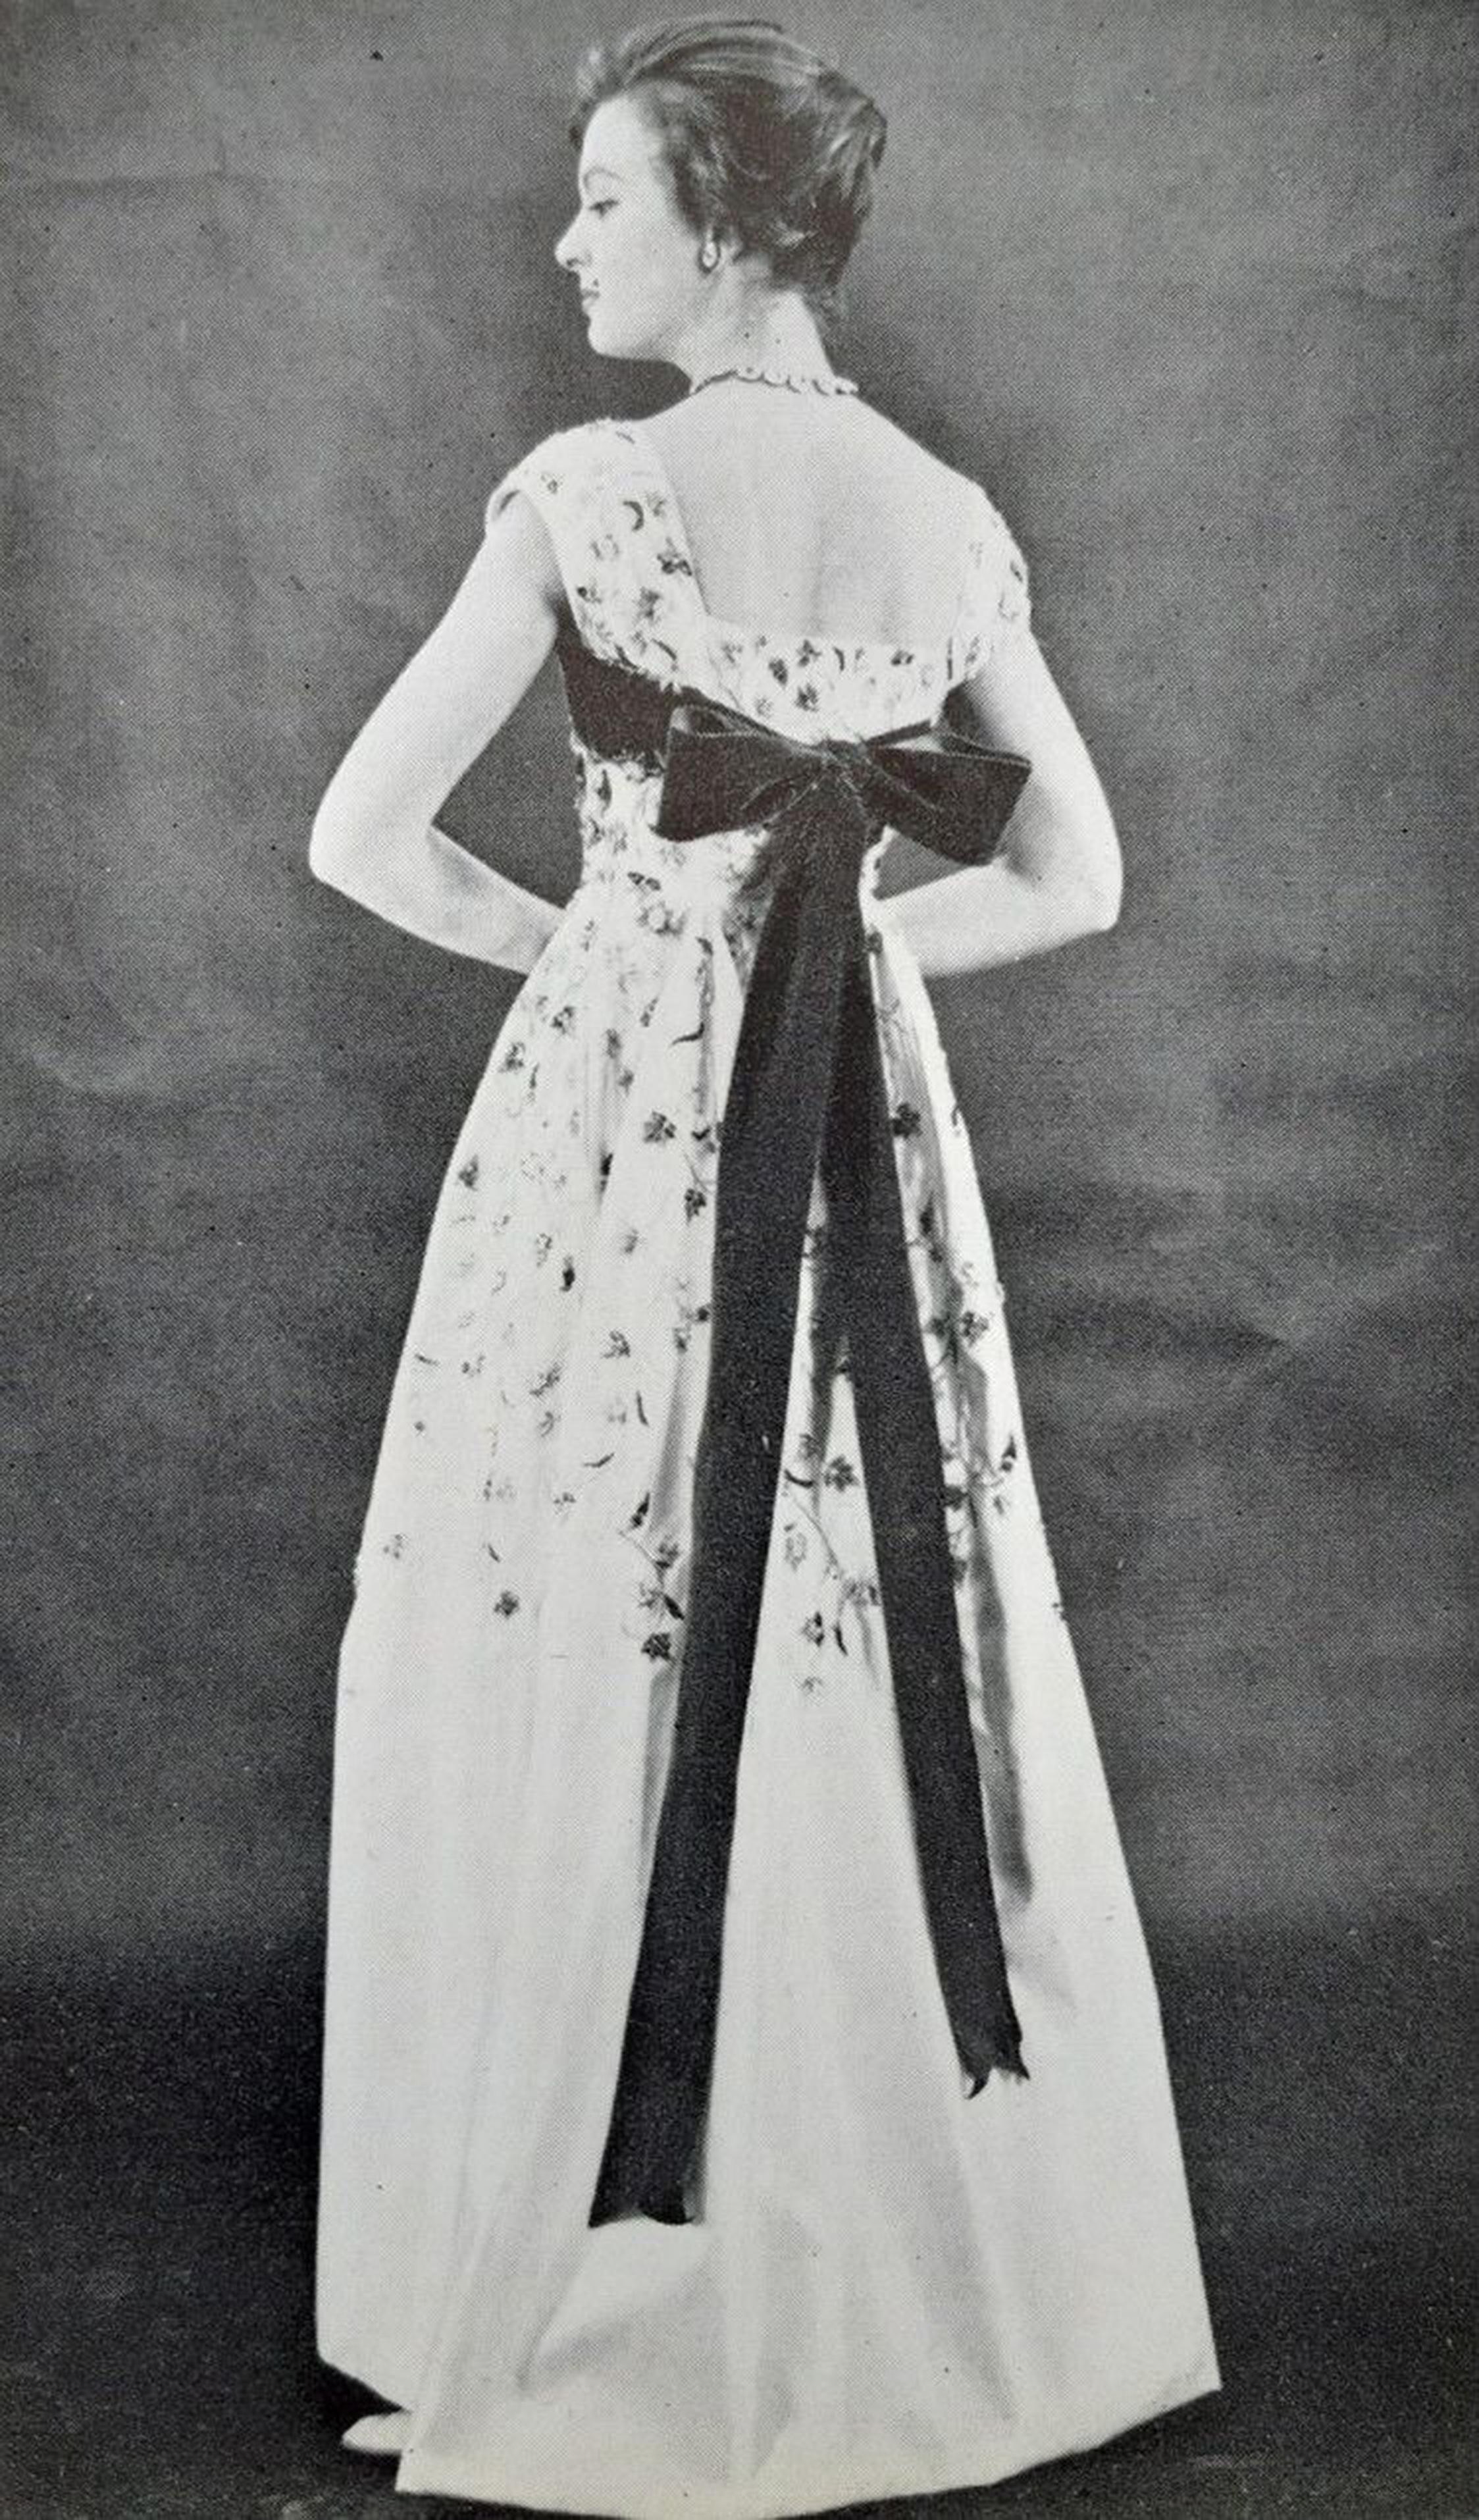 A magnificent, well-documented Jacques Griffe haute couture heavily embroidered and beaded ivory satin gown dating back to his 1956 fall-winter collection. From 1936 to 1939 Jacques Griffe worked with Madeleine Vionnet as a cutter, before launching